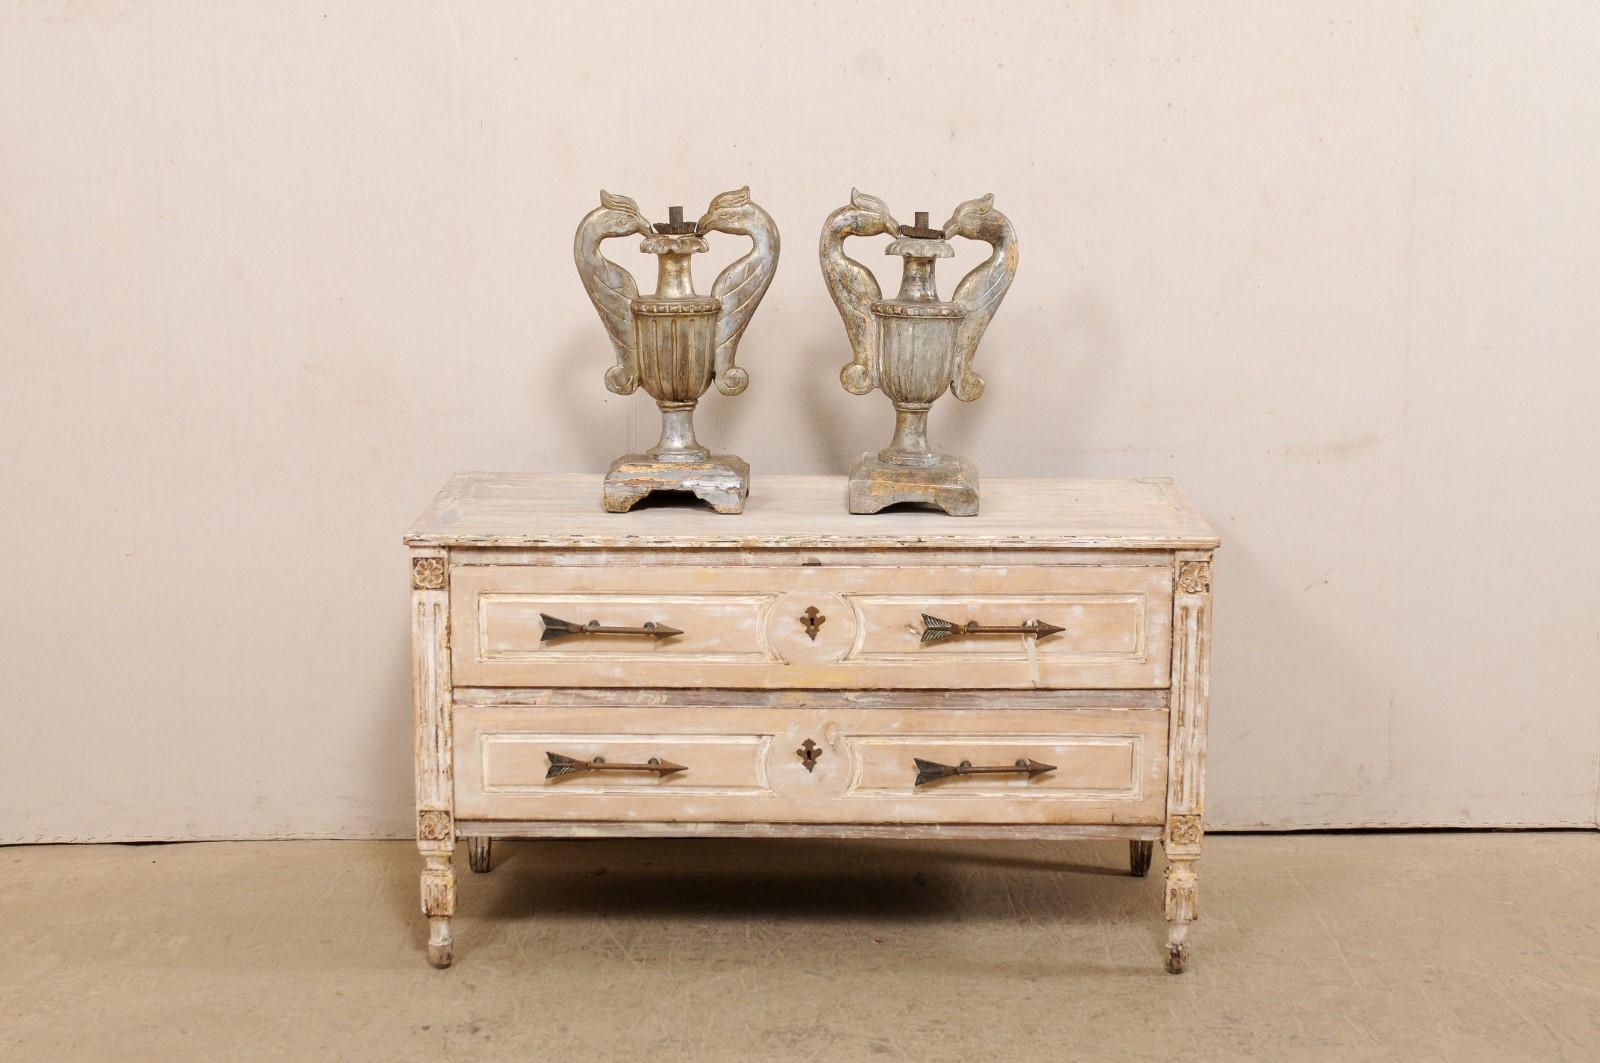 Italian Pair of Wood Candle Lamp Urns with Carved Bird Handles, 19th Century In Good Condition For Sale In Atlanta, GA